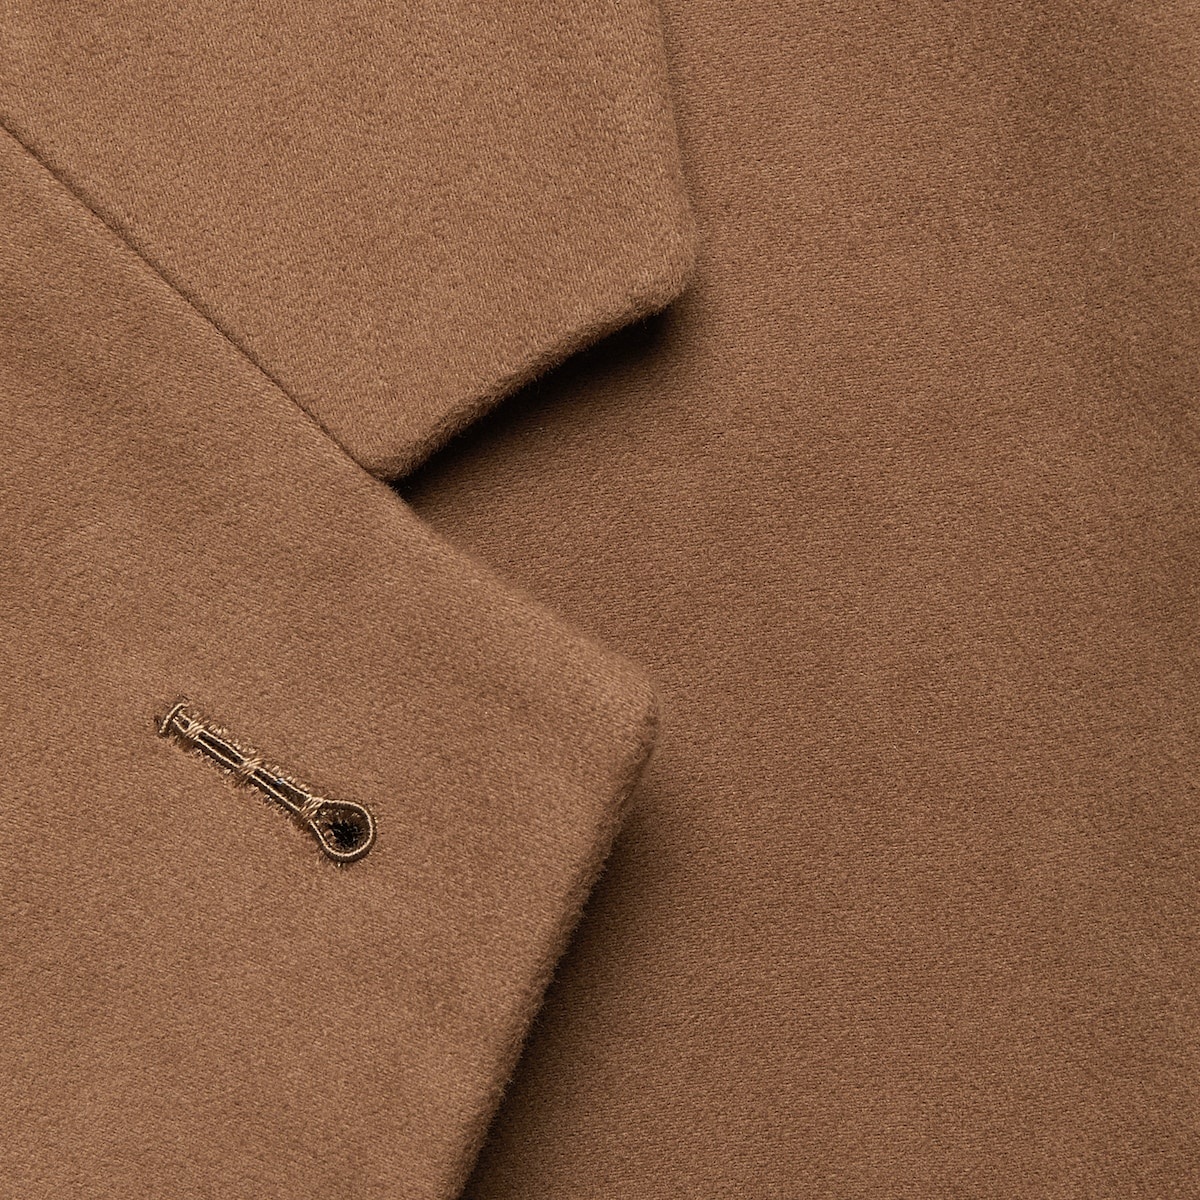 Smooth coat with Gucci Web label - 5